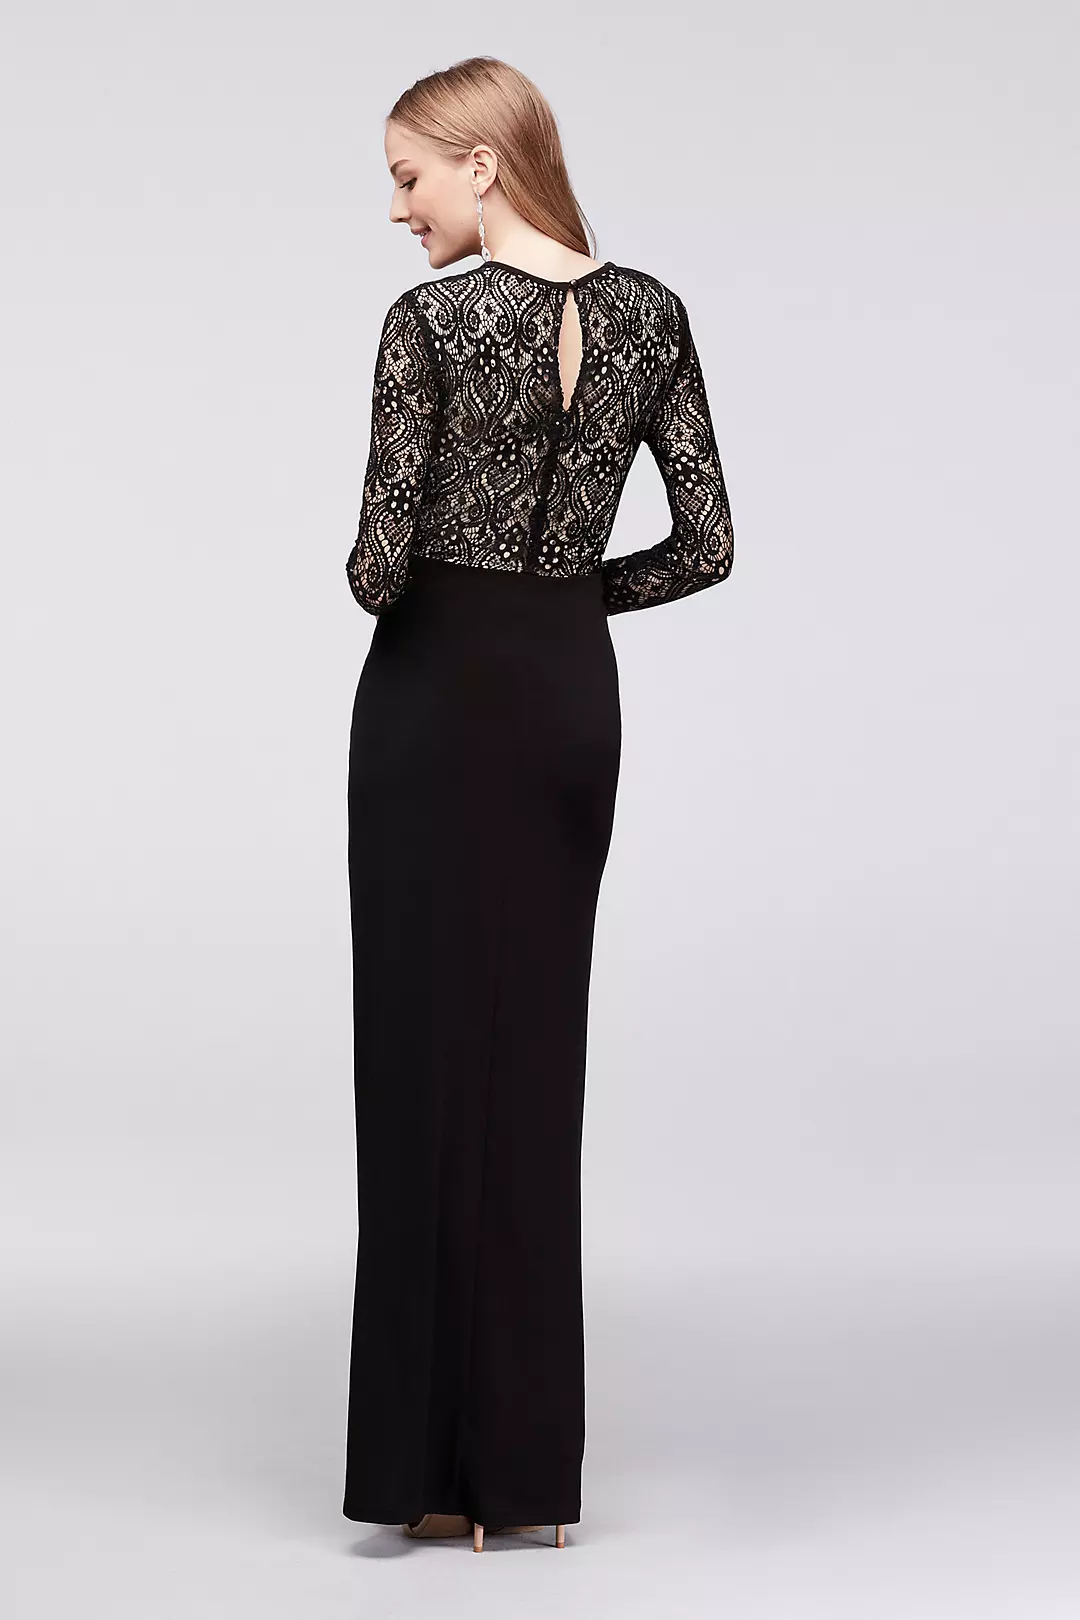 Deep V-Neck Sequin Lace and Jersey Sheath Gown Image 2